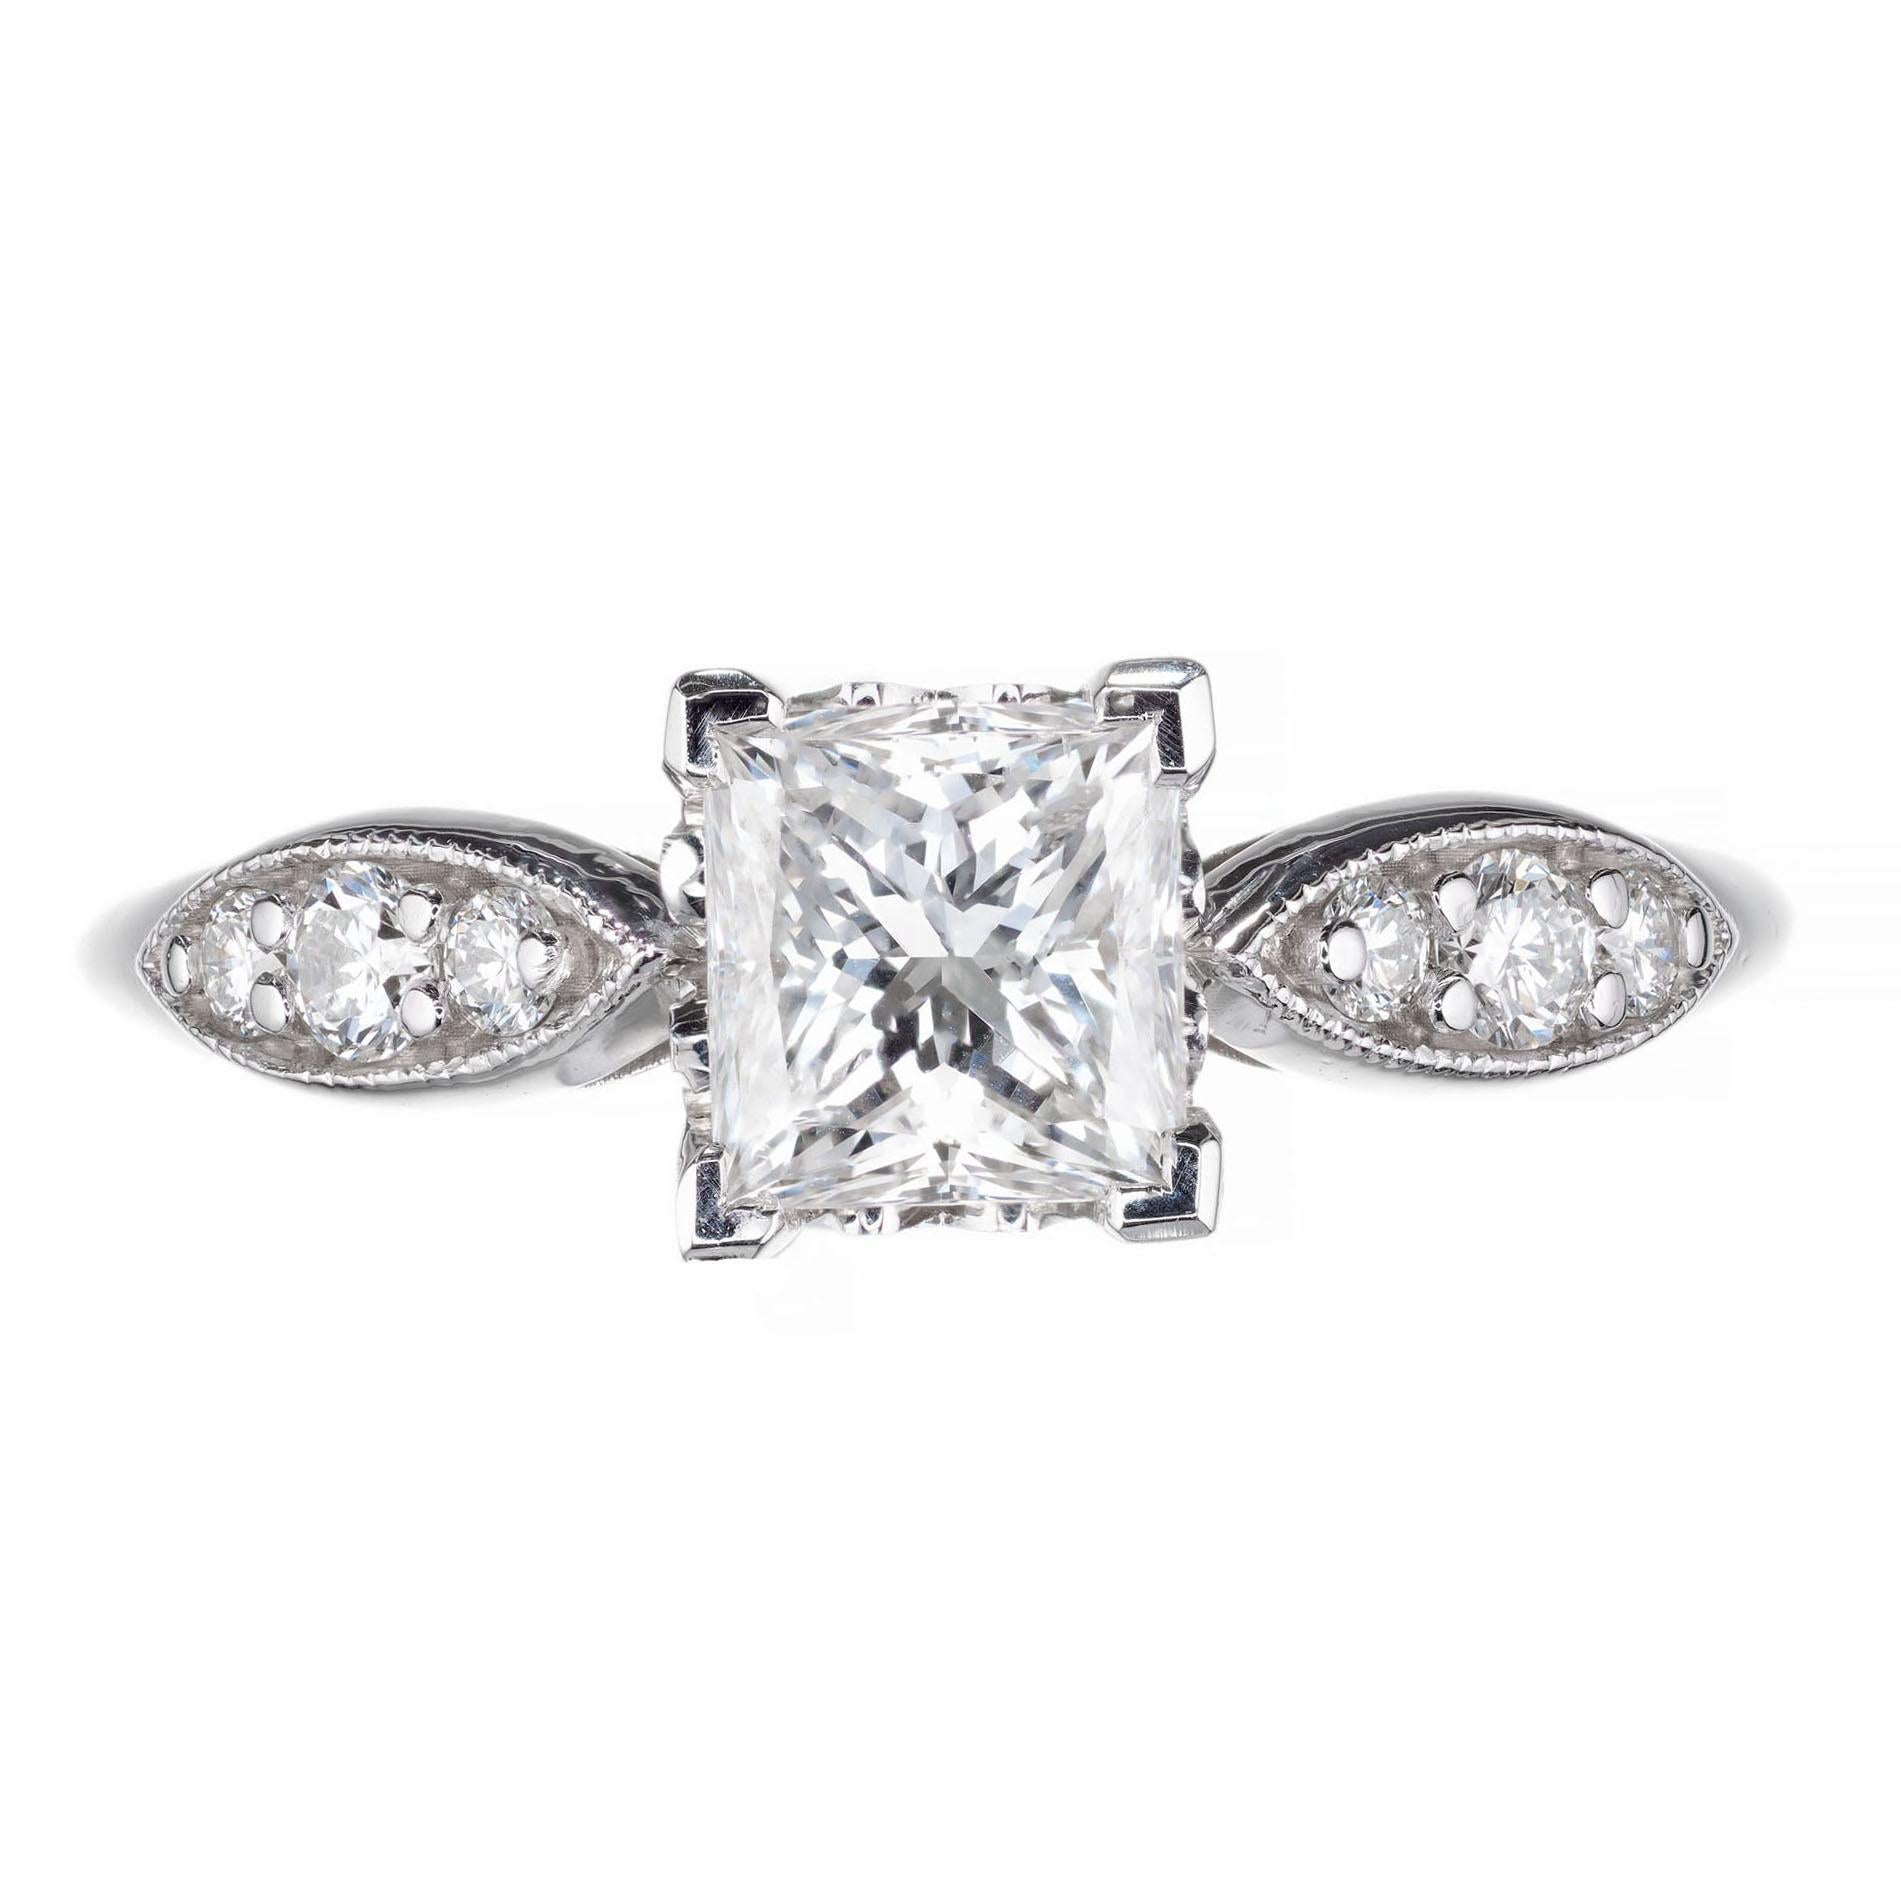 Princess cut diamond engagement ring. 14k white gold setting with a GIA certified center stone, with 6 round accent diamonds. 

1 princess cut diamond G SI, approx. 1.01ct  GIA Cert# 1195873378
6 round brilliant cut diamond G VS approx. .20ct
Size 7